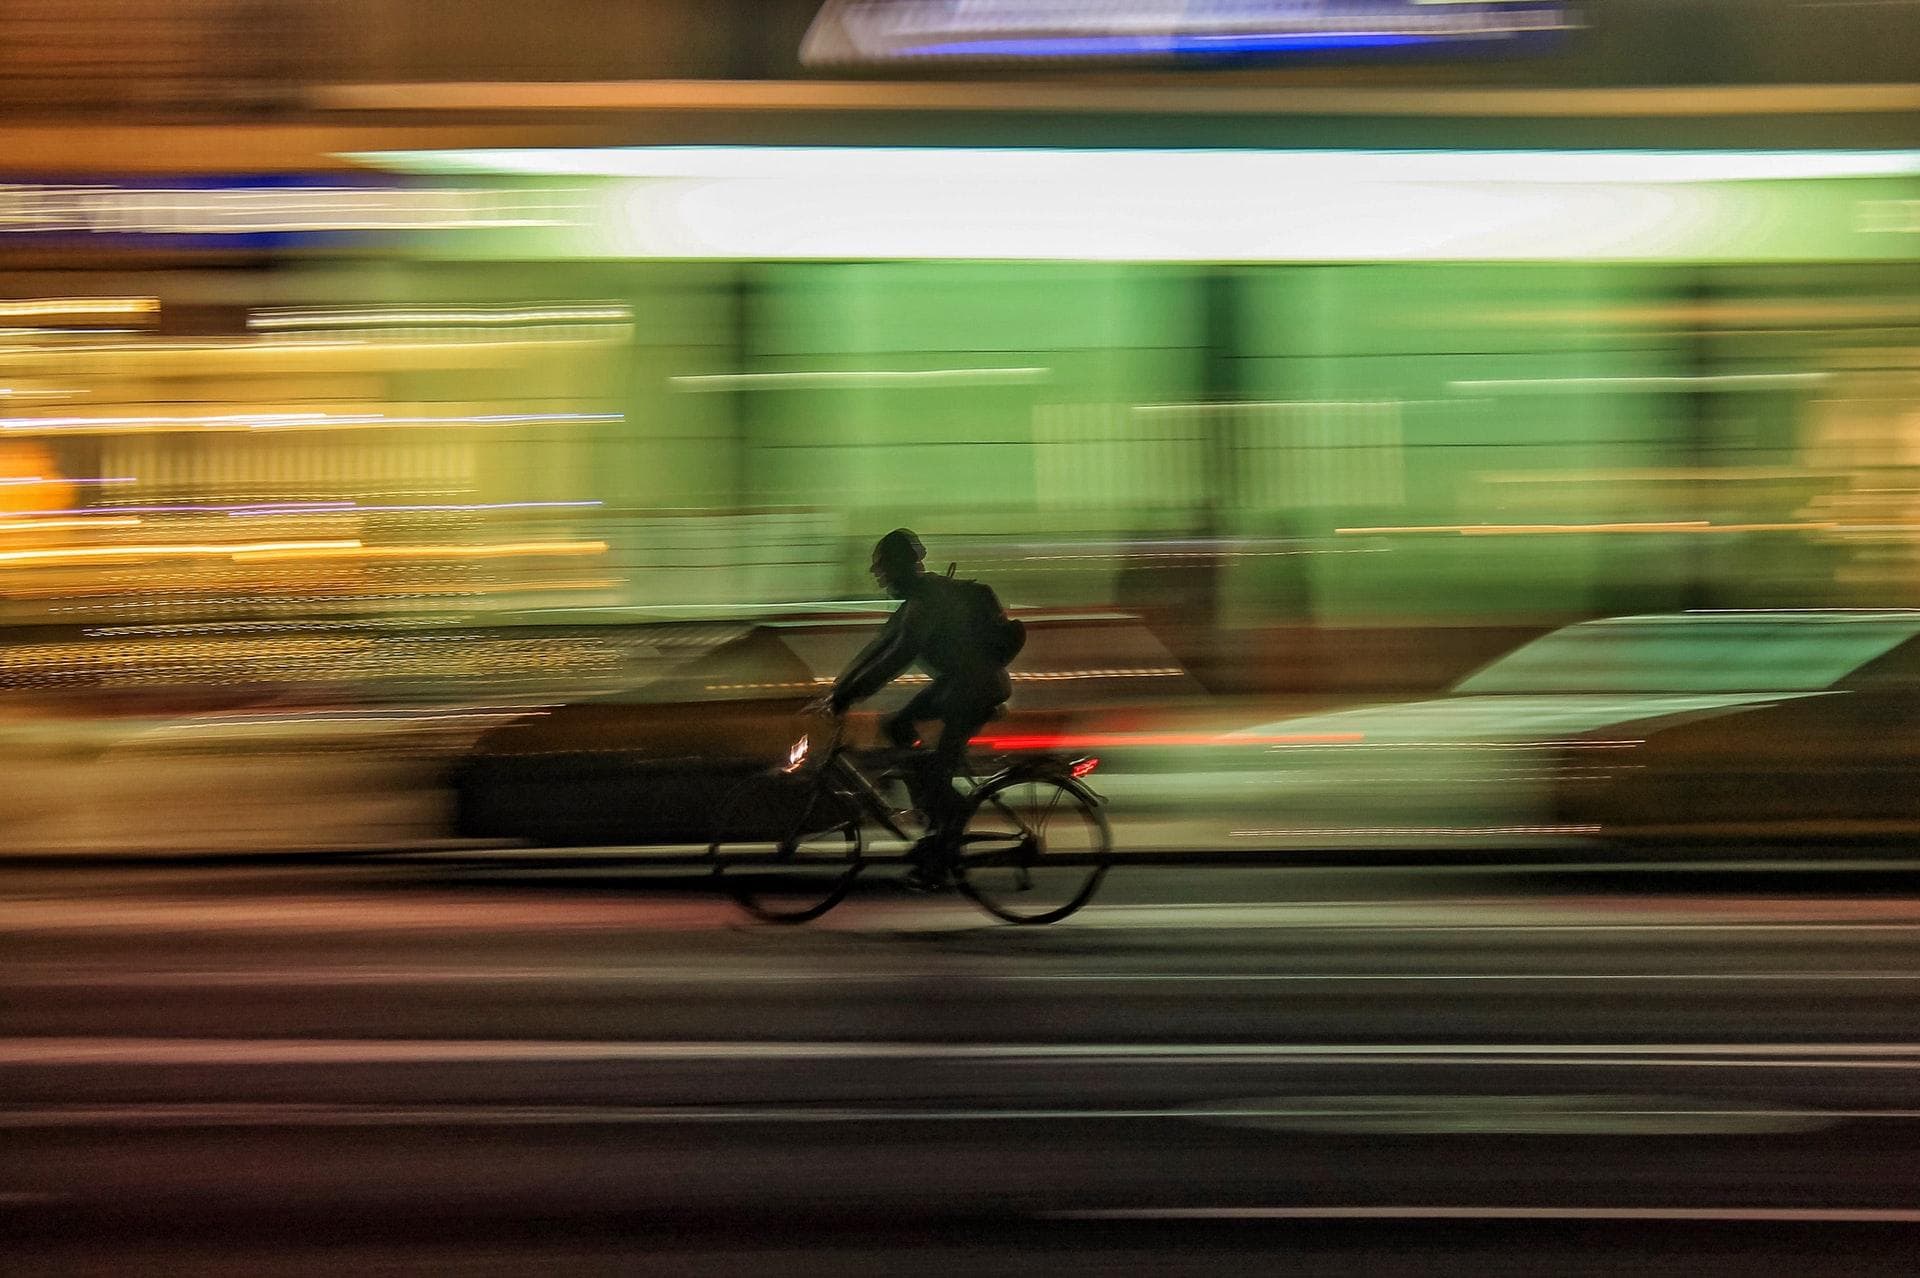 fast biker. background is city lights at night, blurred due to the high speed of biker